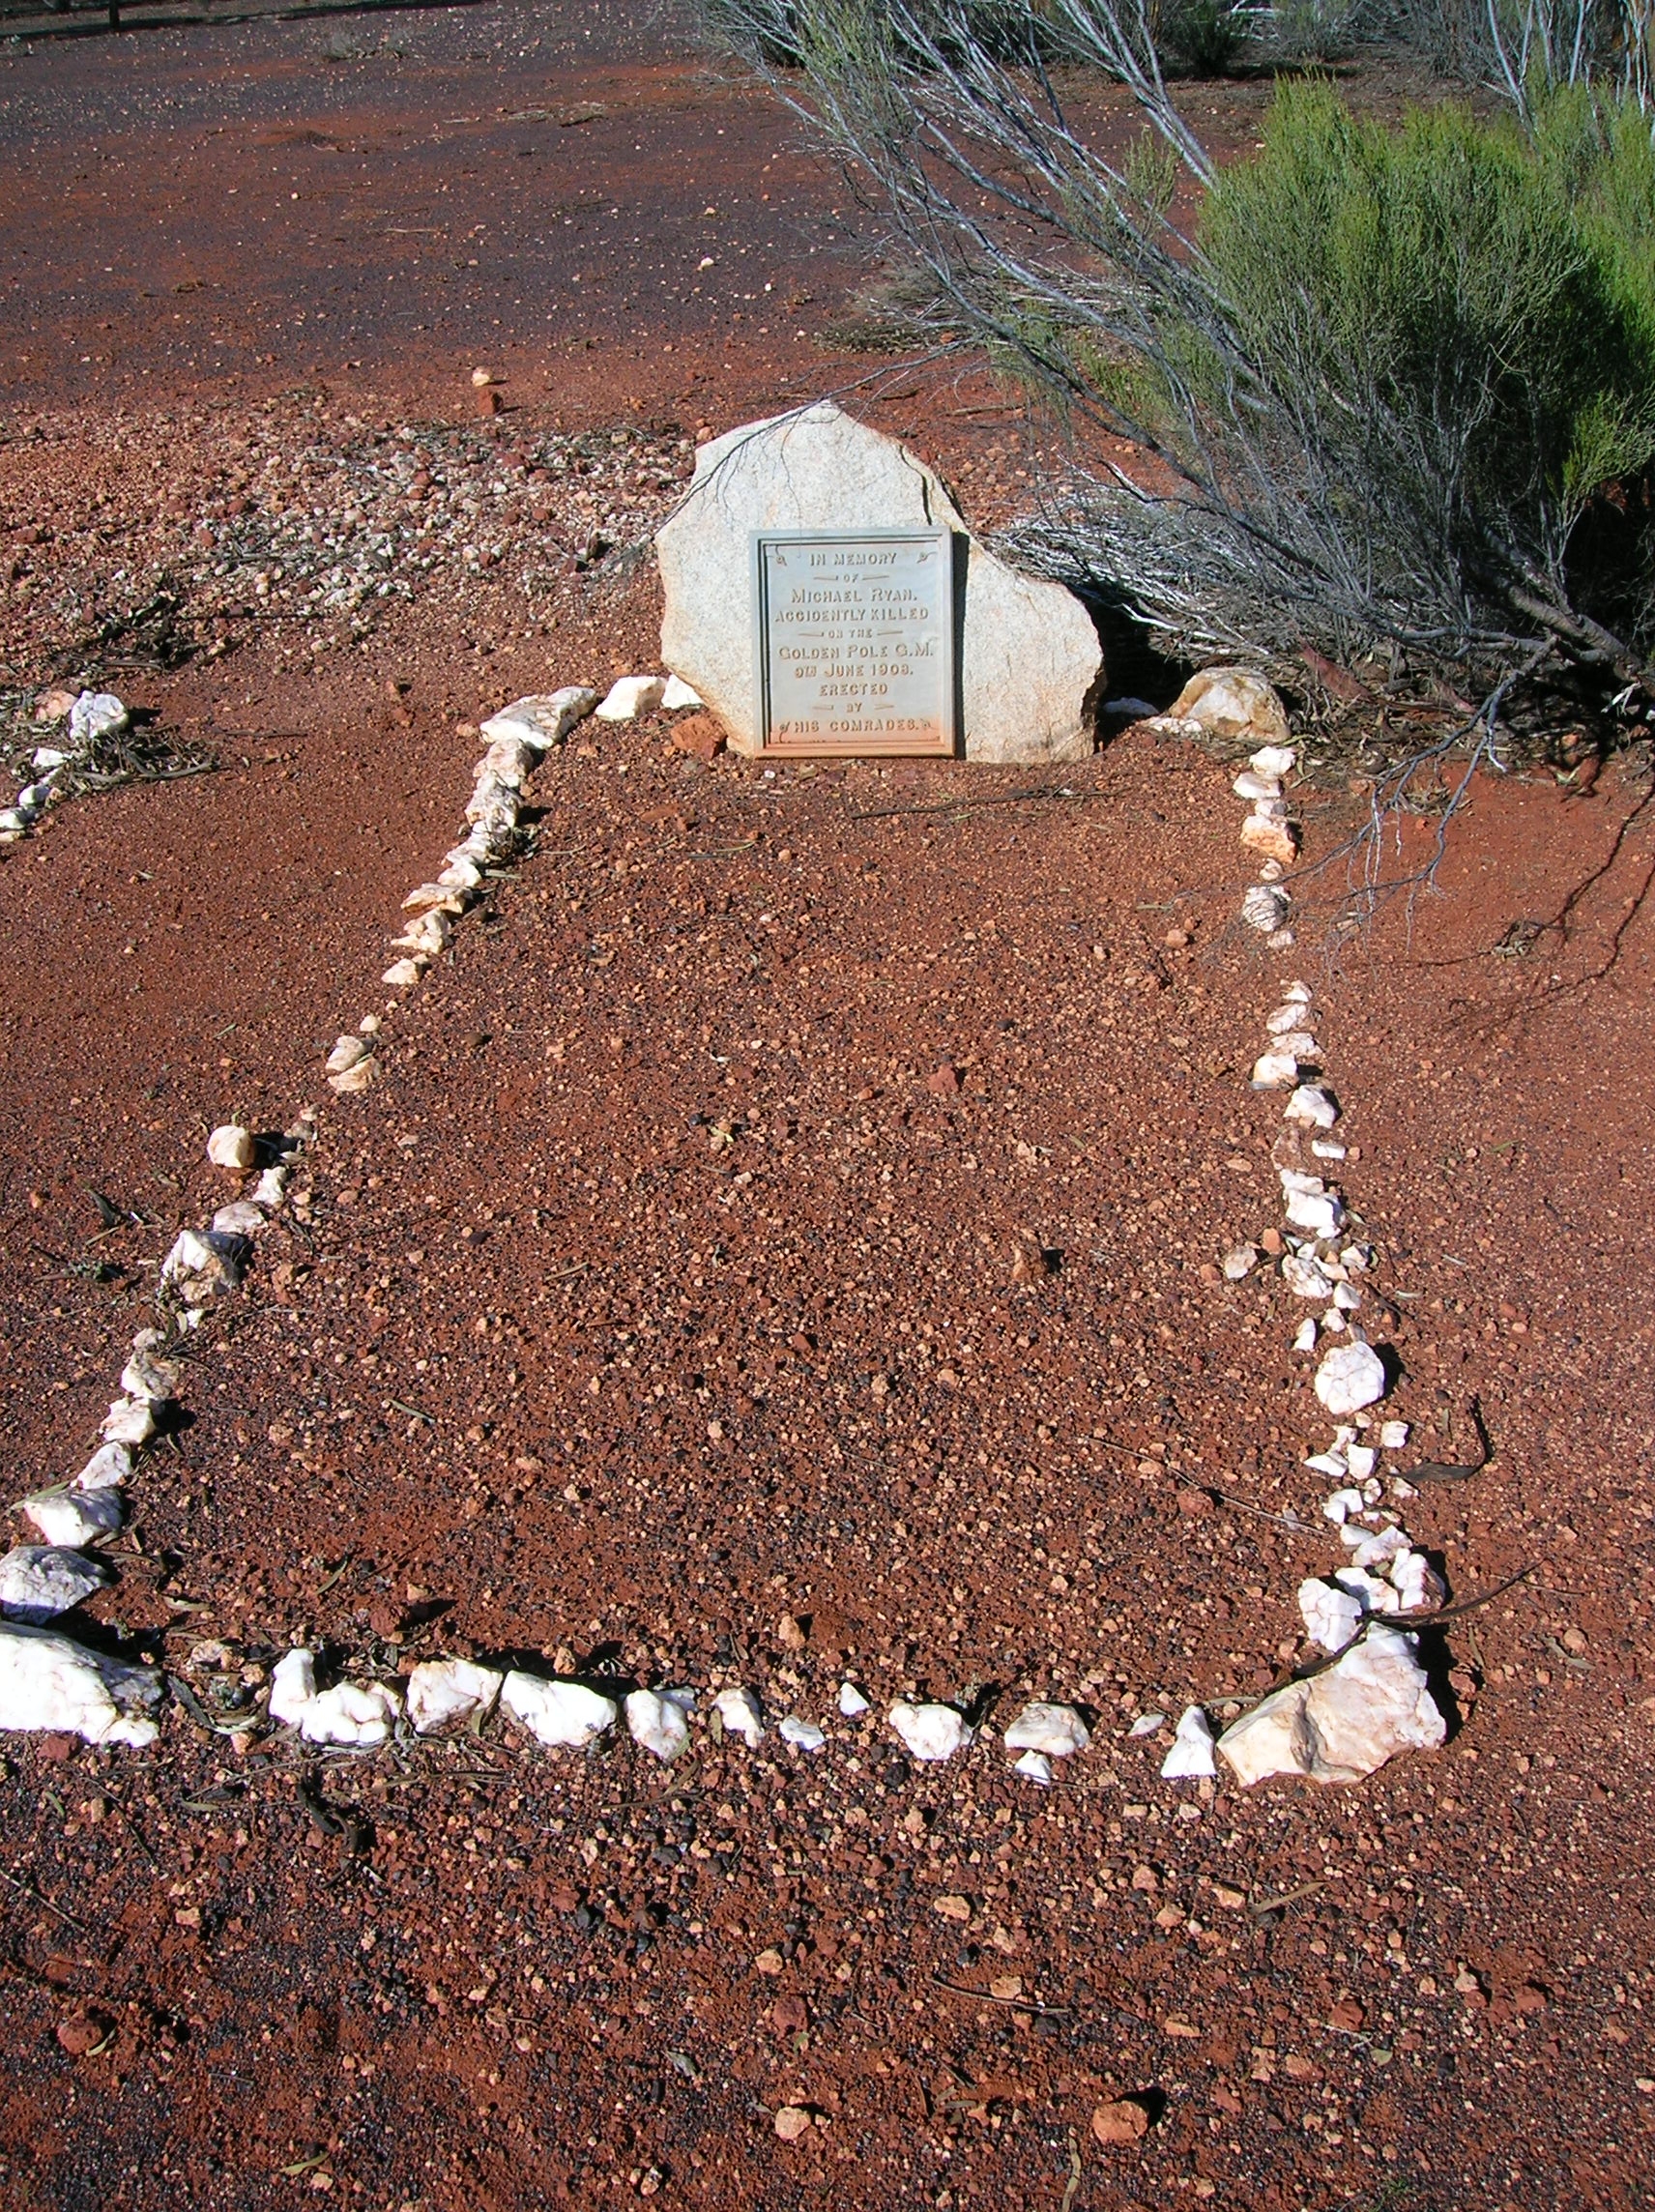 This is a photograph of the grave of Michael RYAN